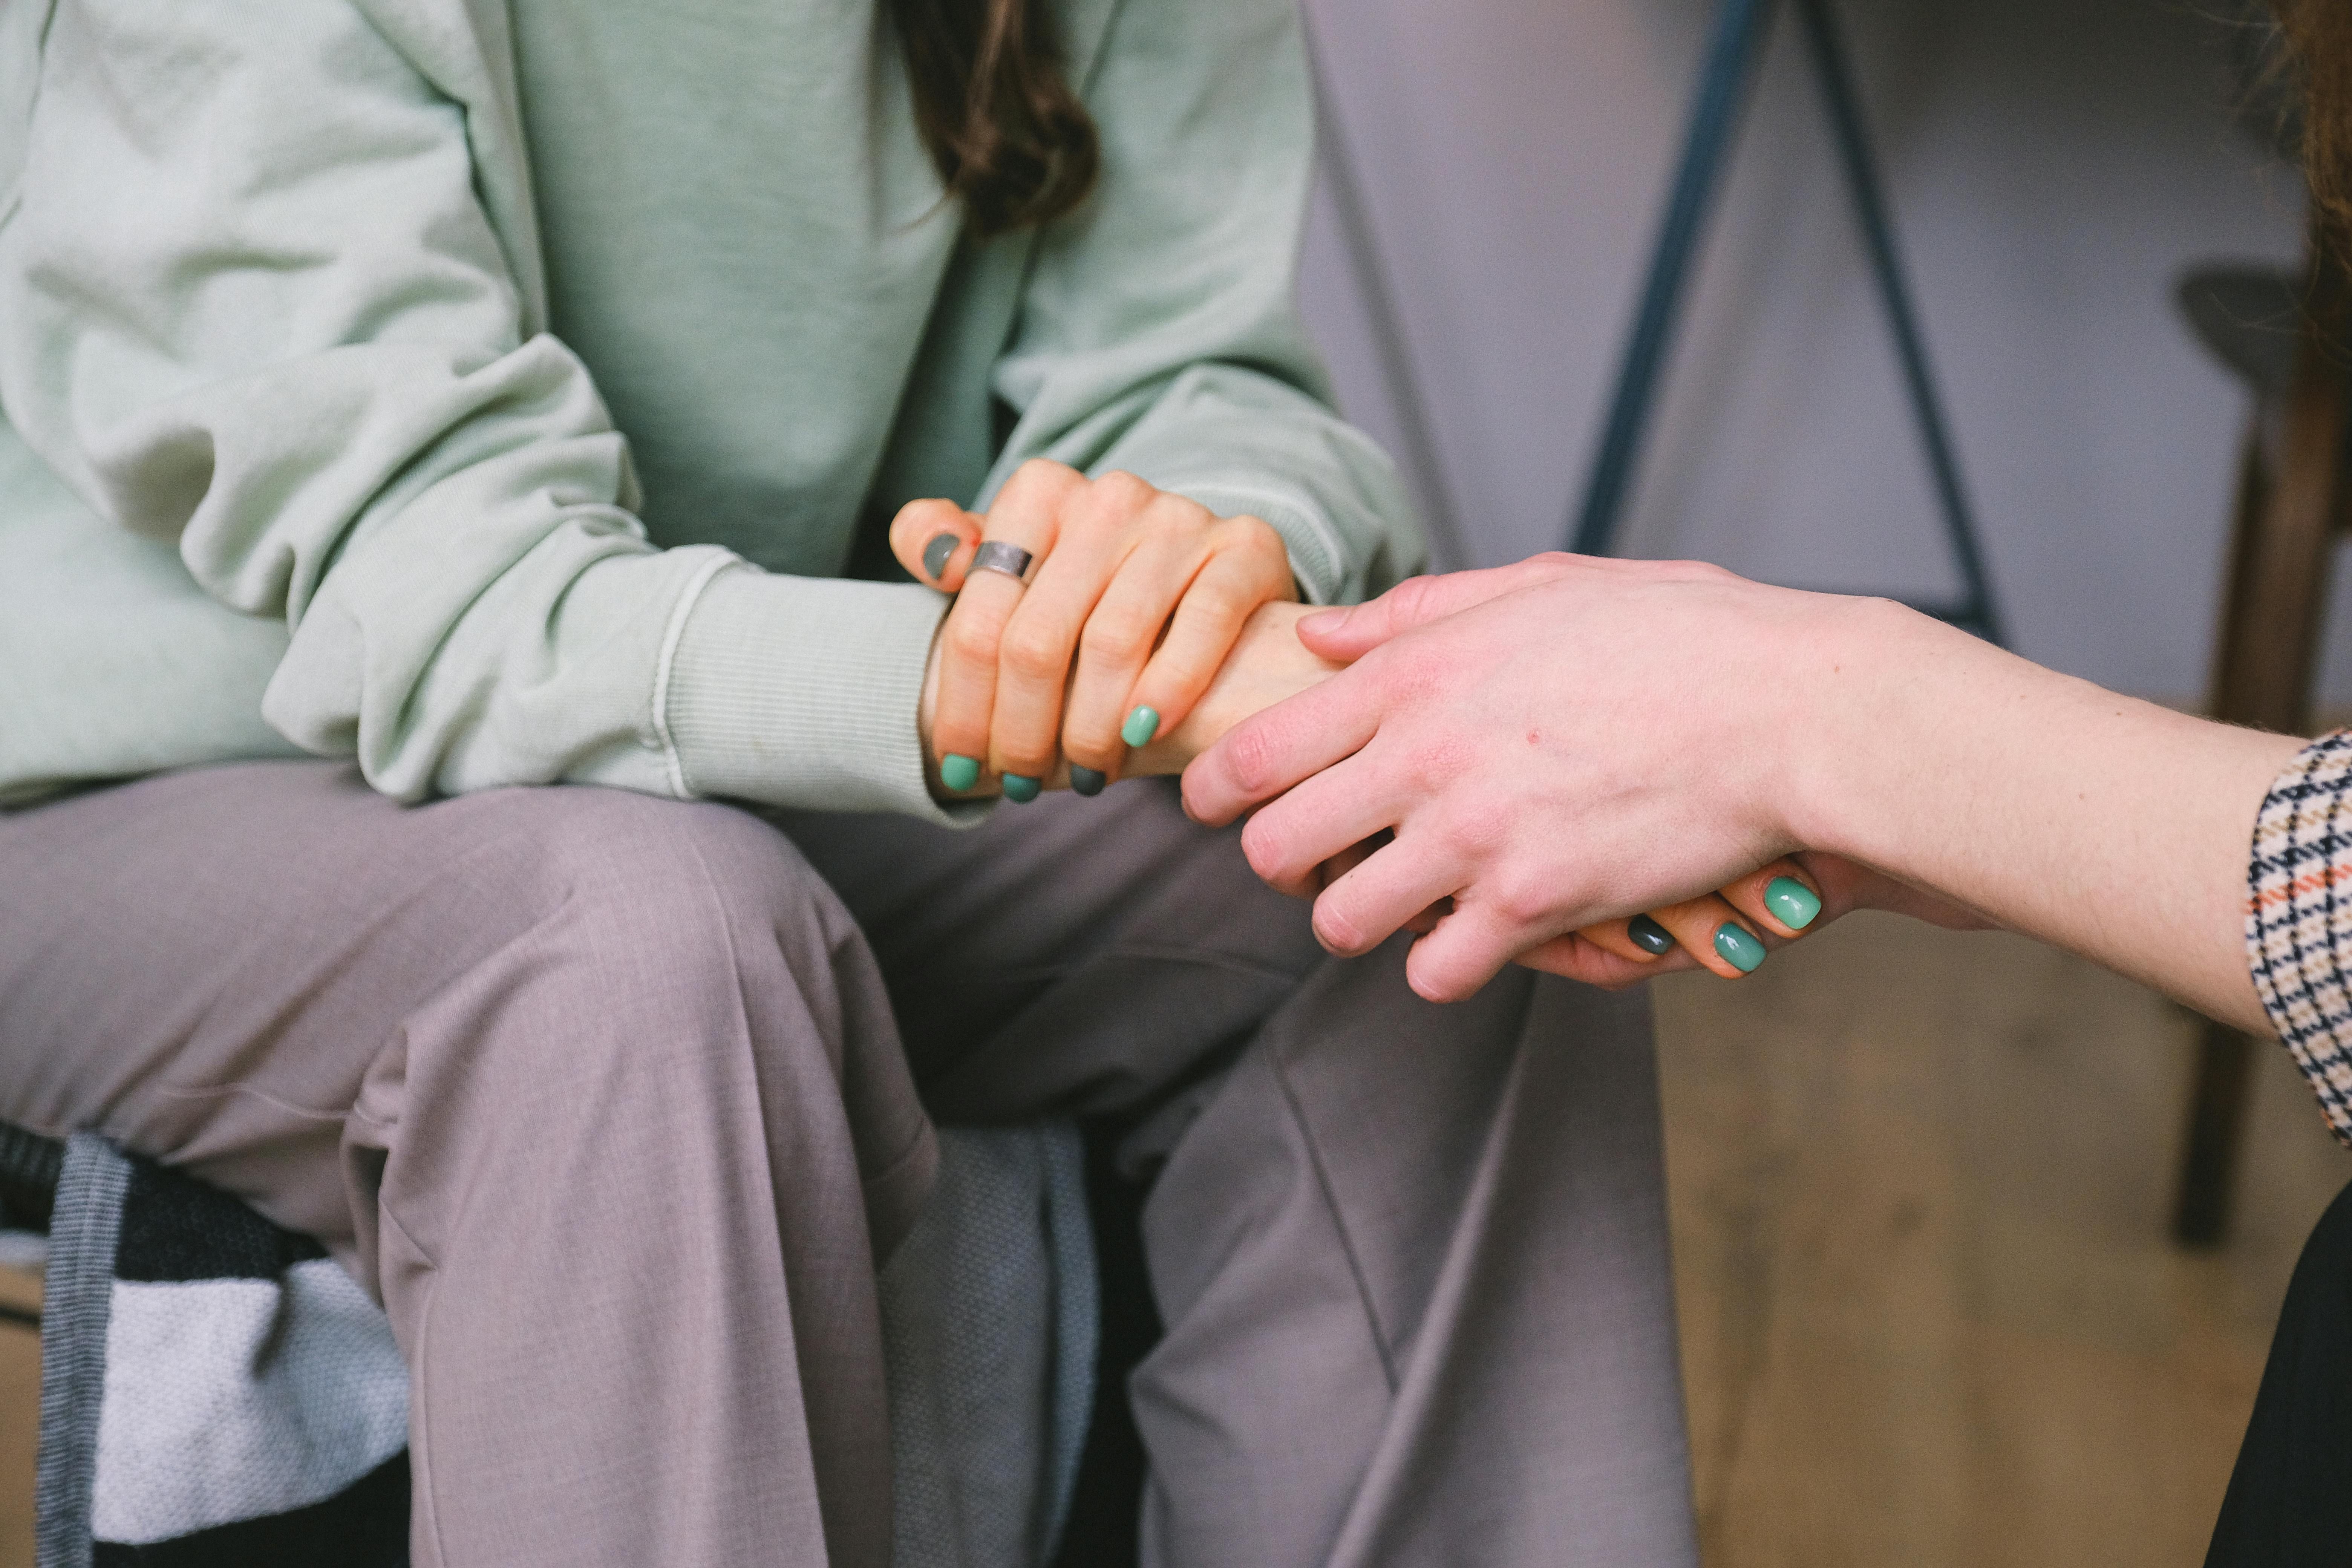 Client and counselor holding hands, symbolizing support in weight loss counseling